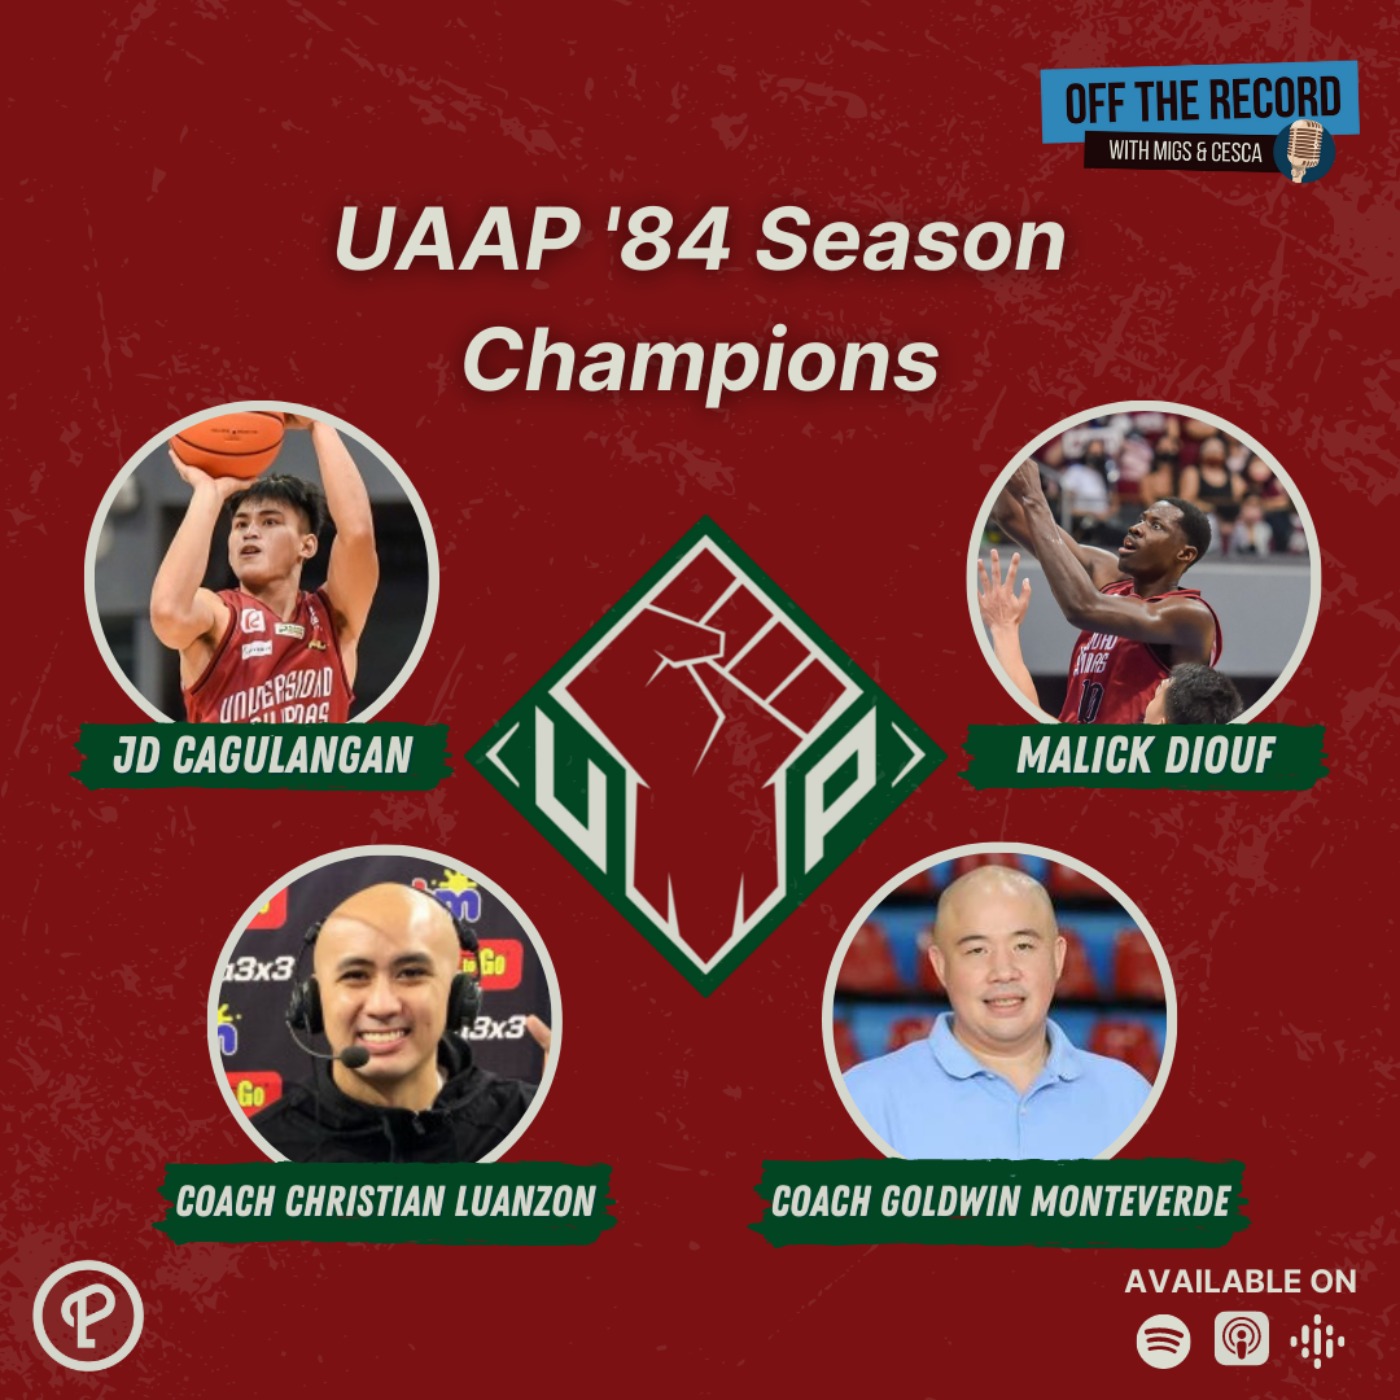 S06E01 UAAP Season 84 Champions UP Fighting Maroons Off The Record